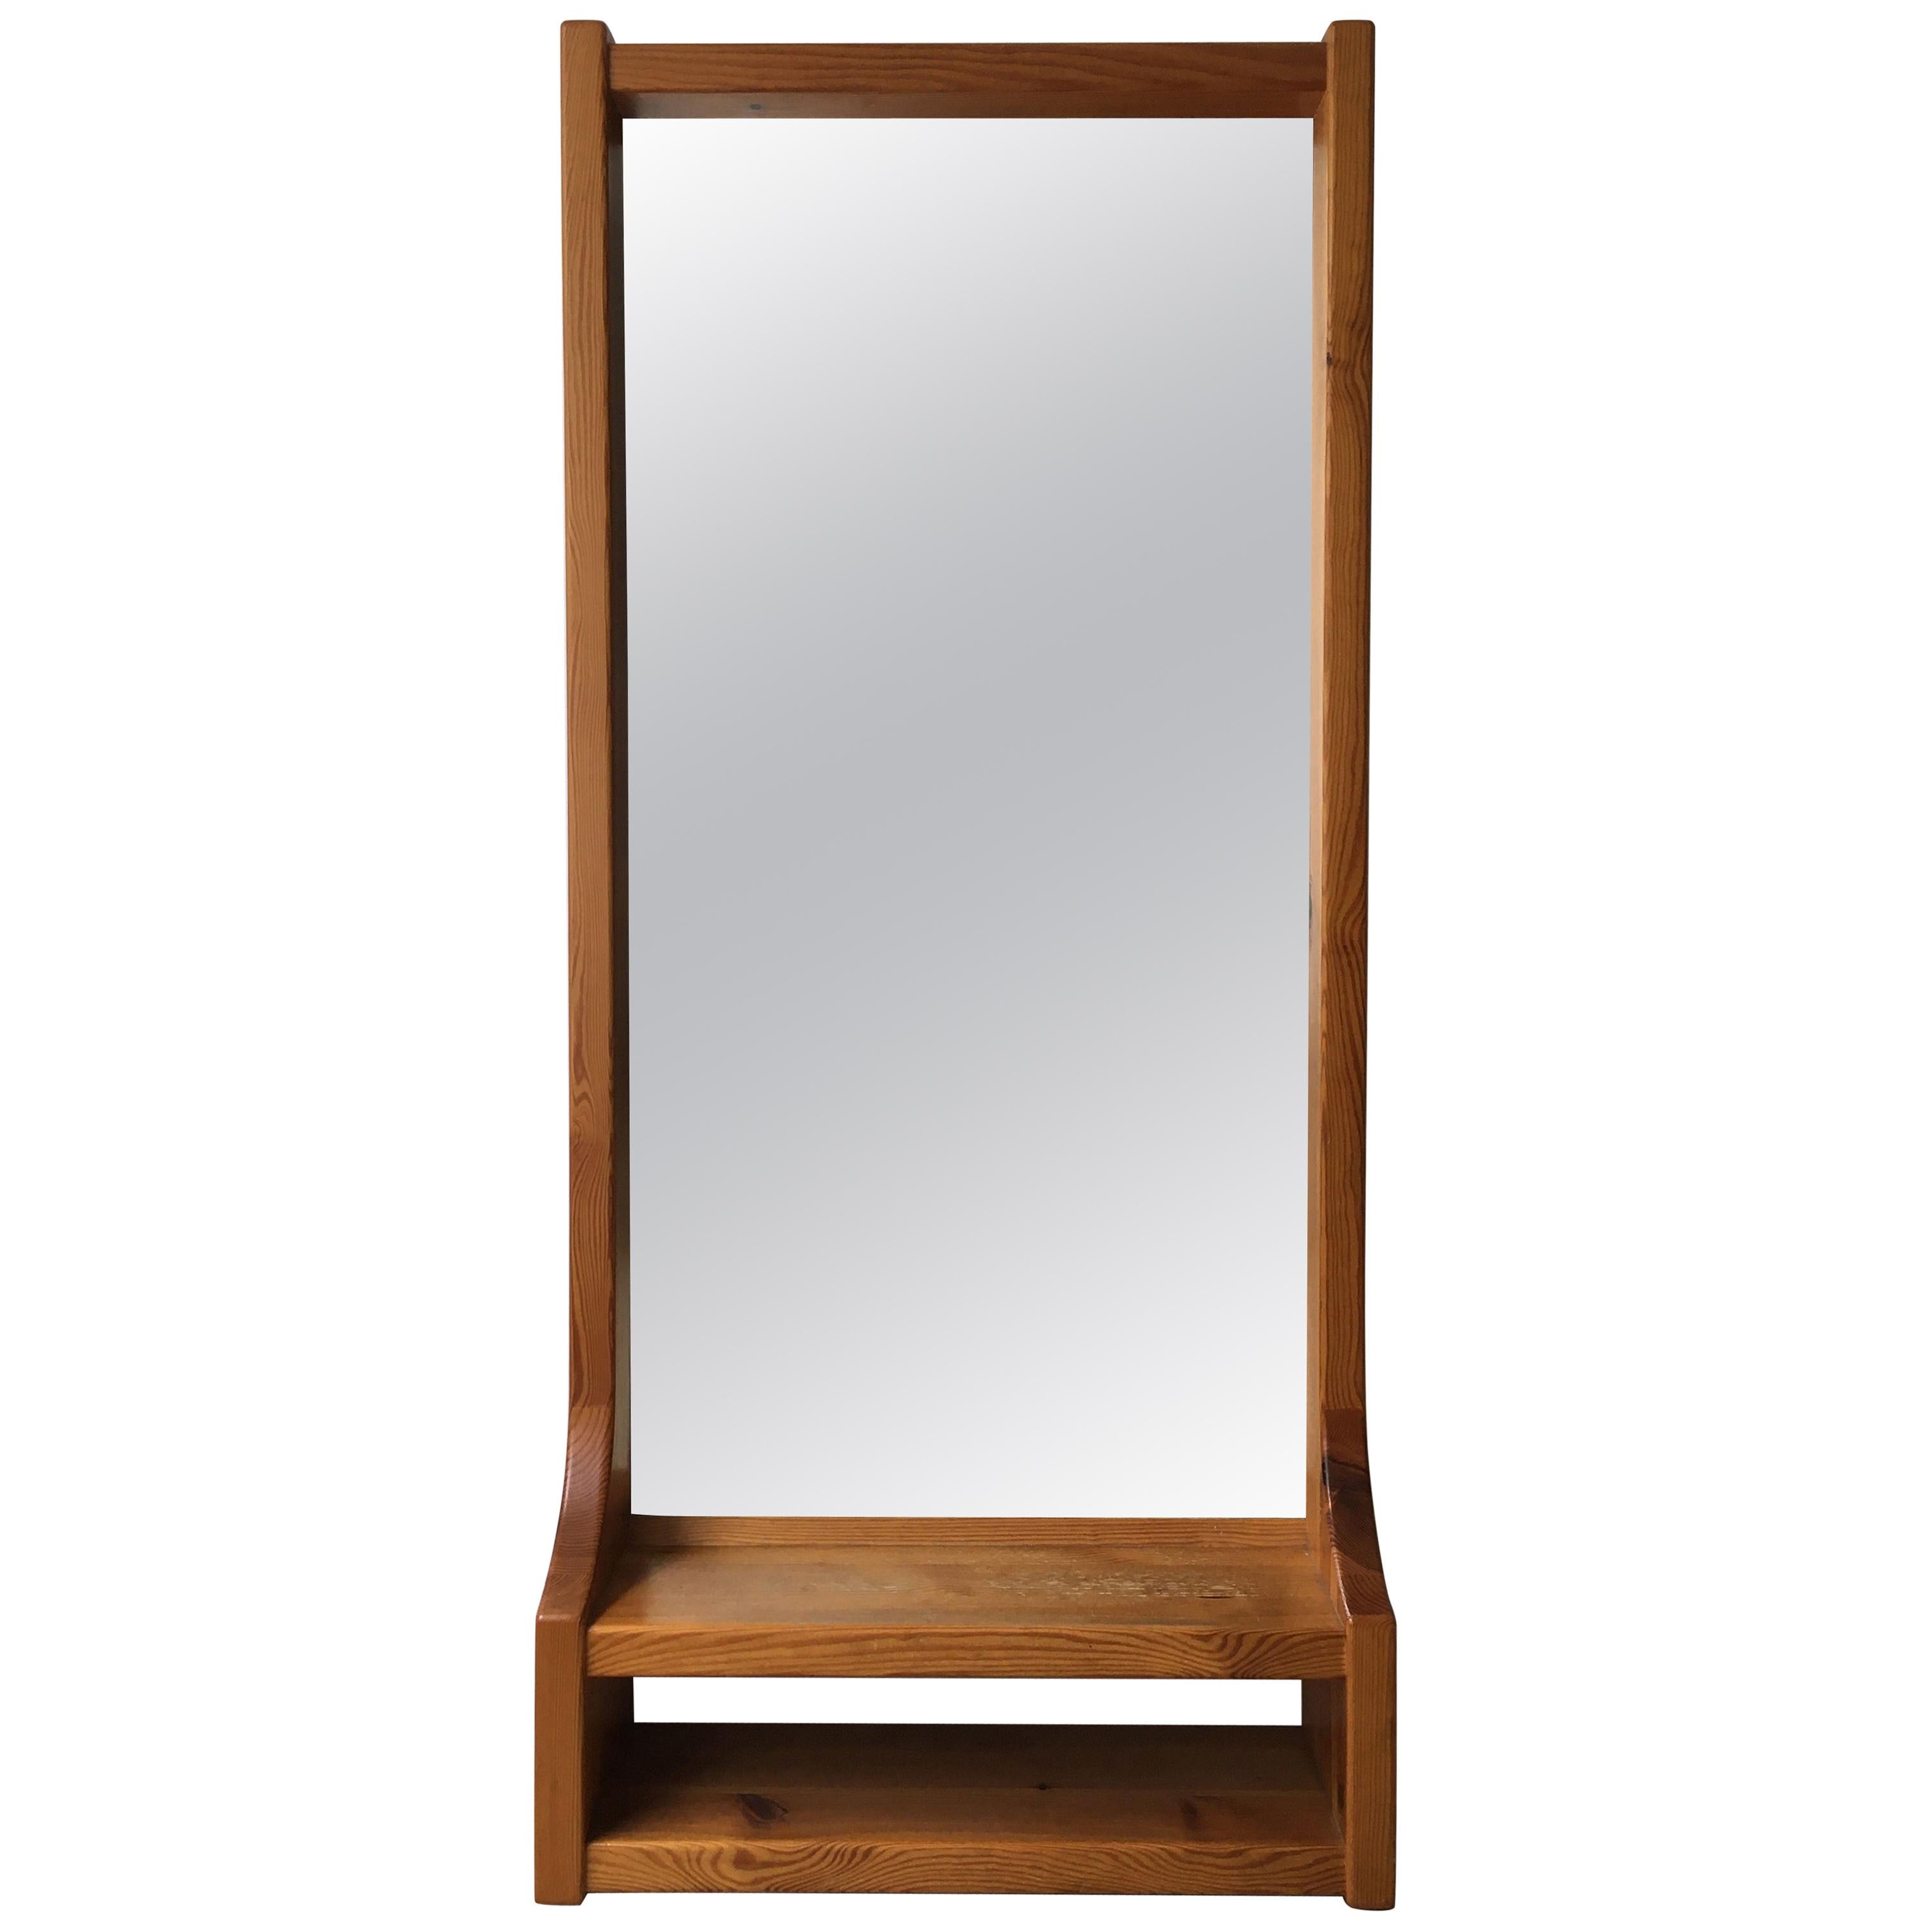 Modern Floating Wall Mirror with Shelf by Glas Mäster in Markaryd, Sweden, 1970s For Sale